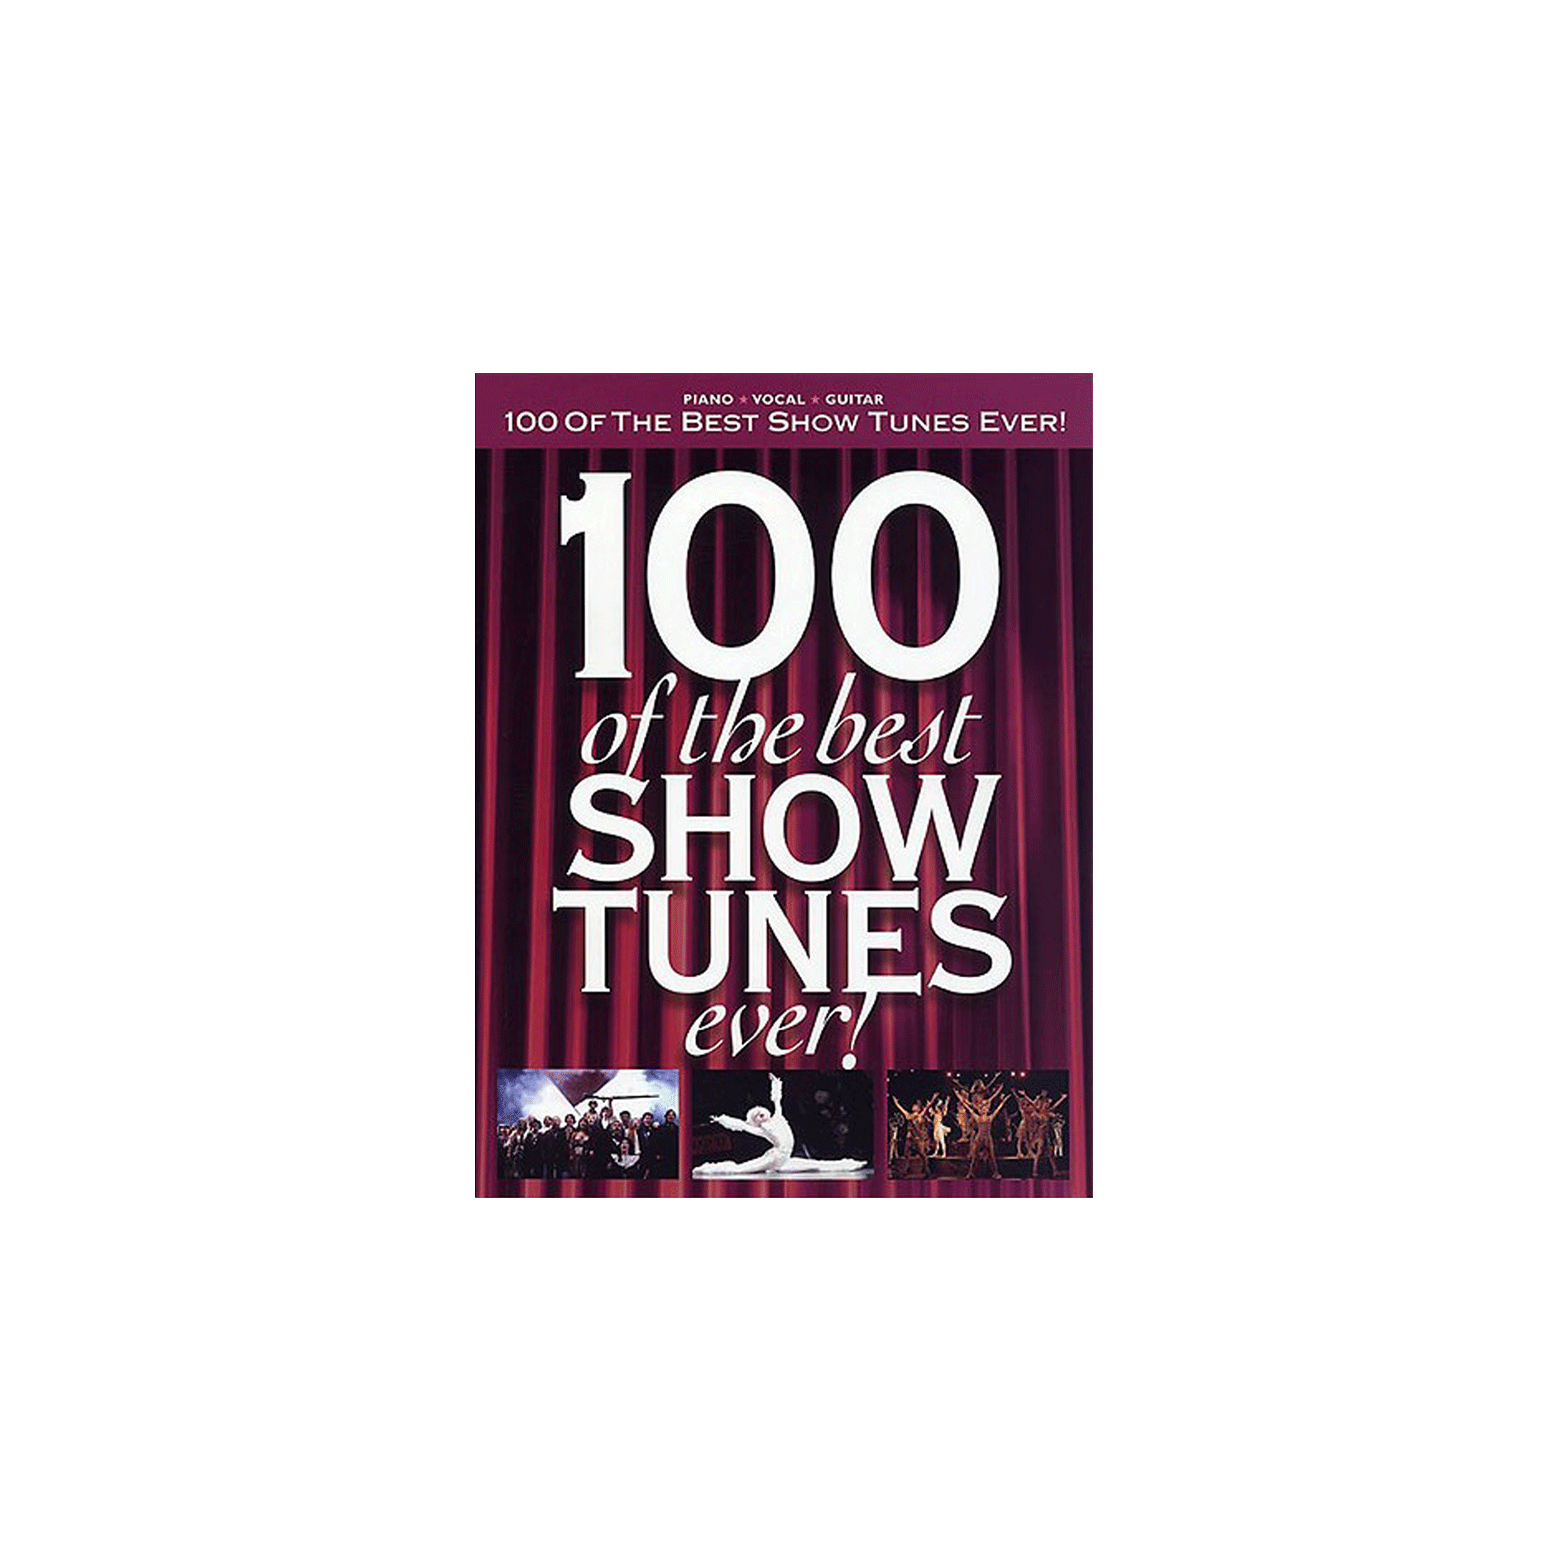 100 Of The Best Show Tunes Ever